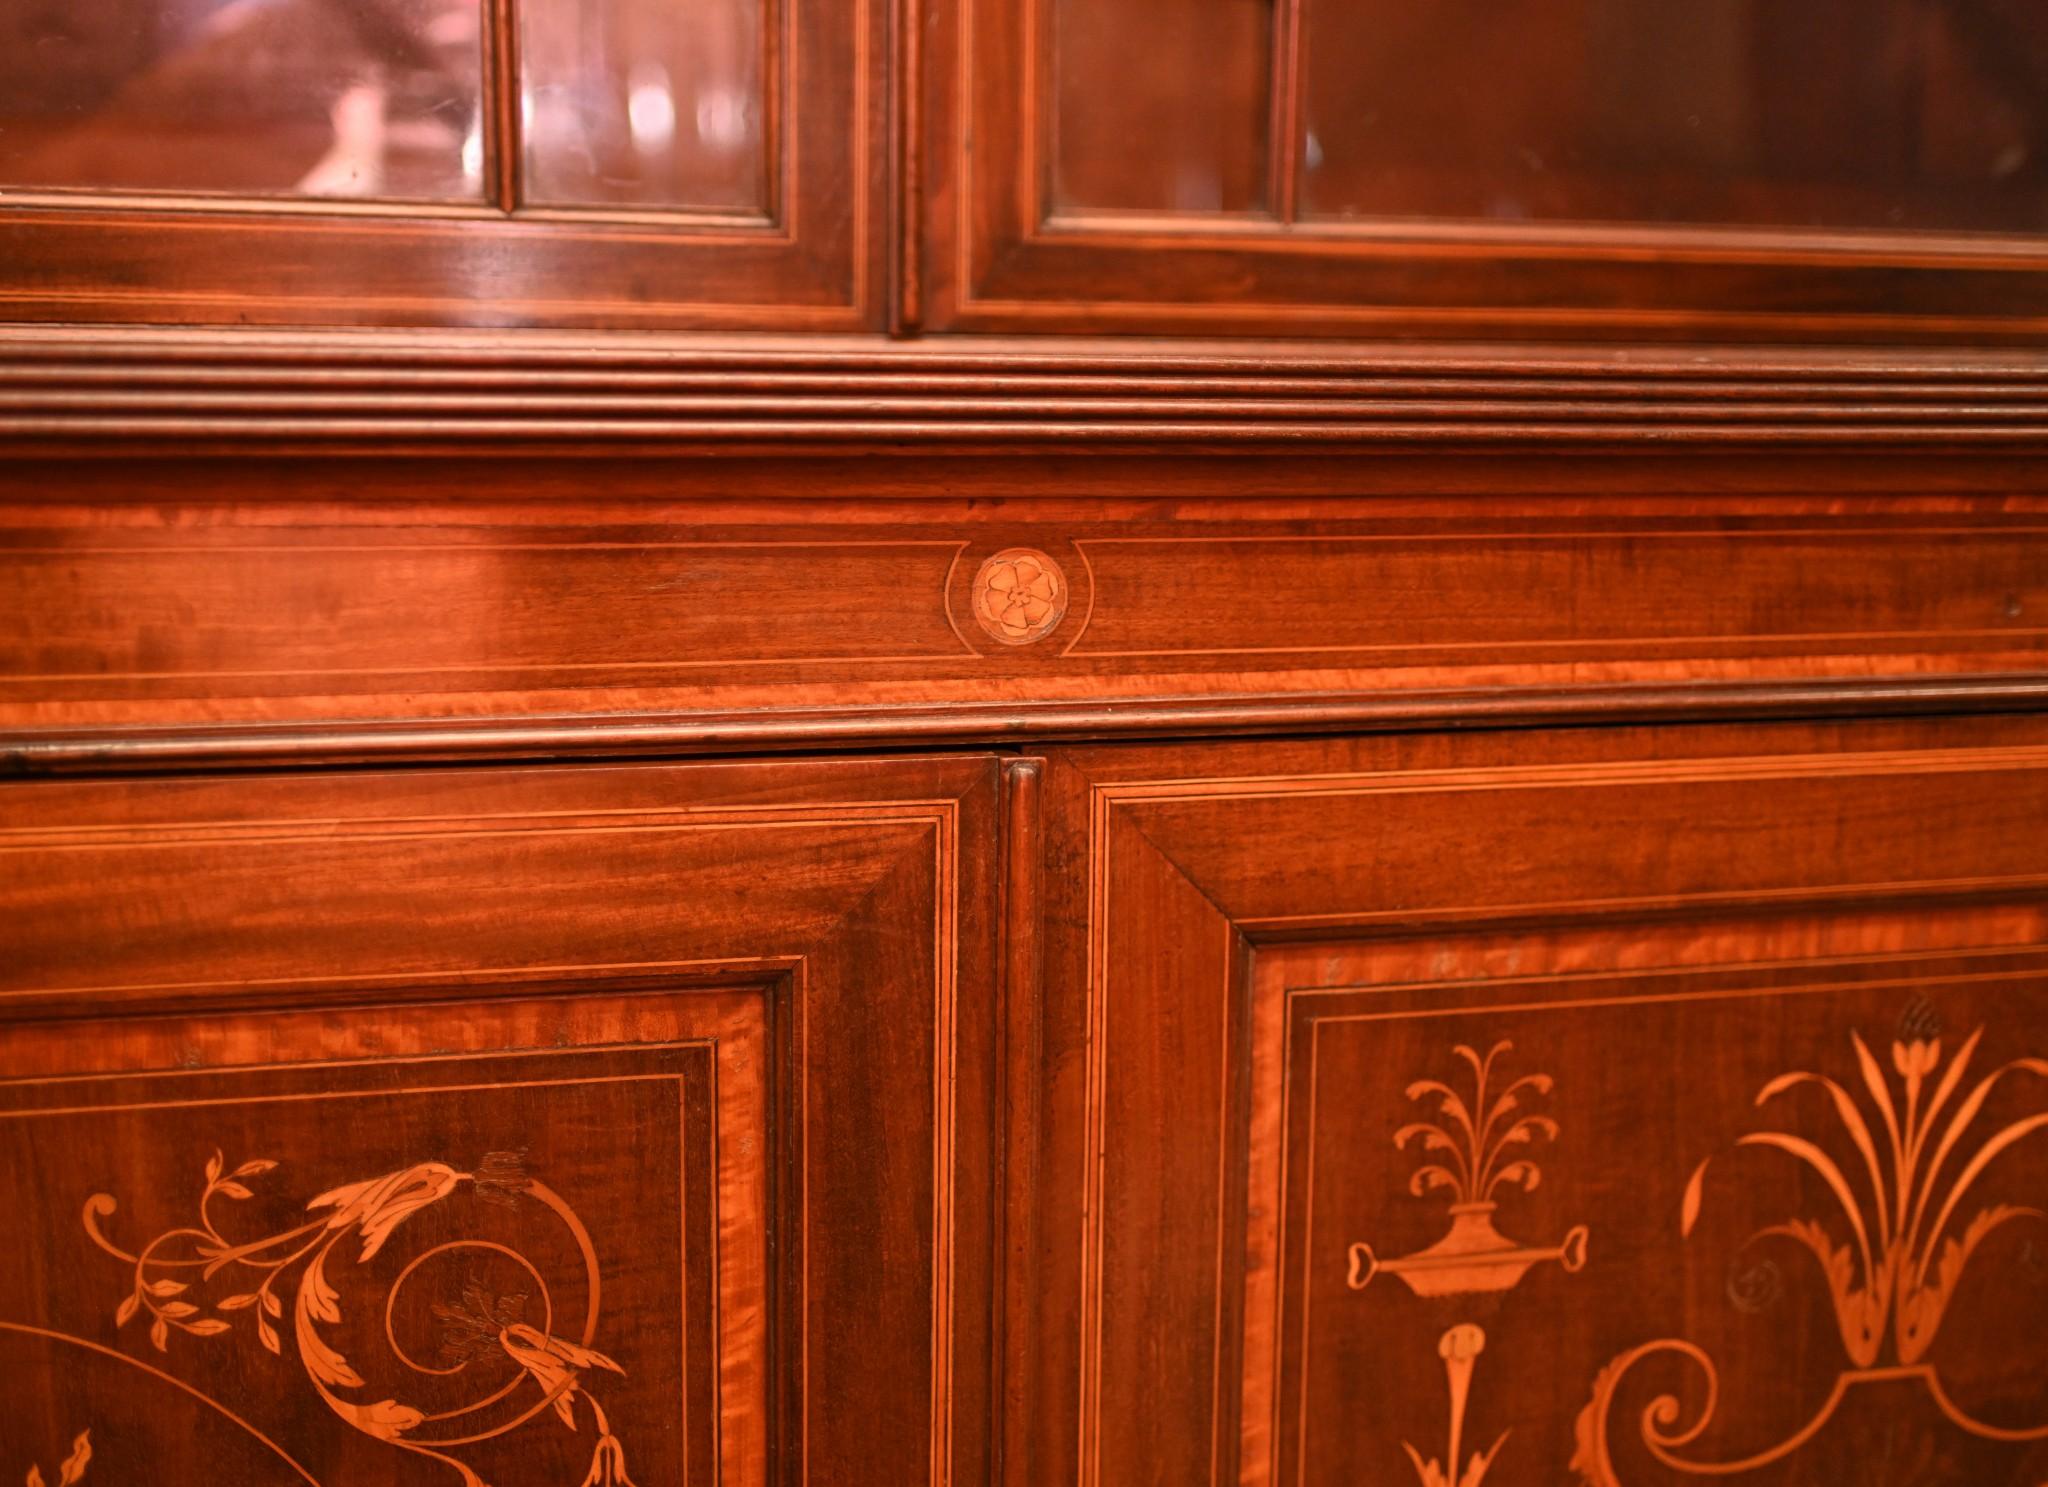 Glorious Sheraton revival mahogany breakfront bookcase 
Grand piece decorated with profuse marquetry inlay
Inlay work includes floral motifs, urns, floral arabesques and other Sheraton motifs
Good size, plenty of storage and display sectin at